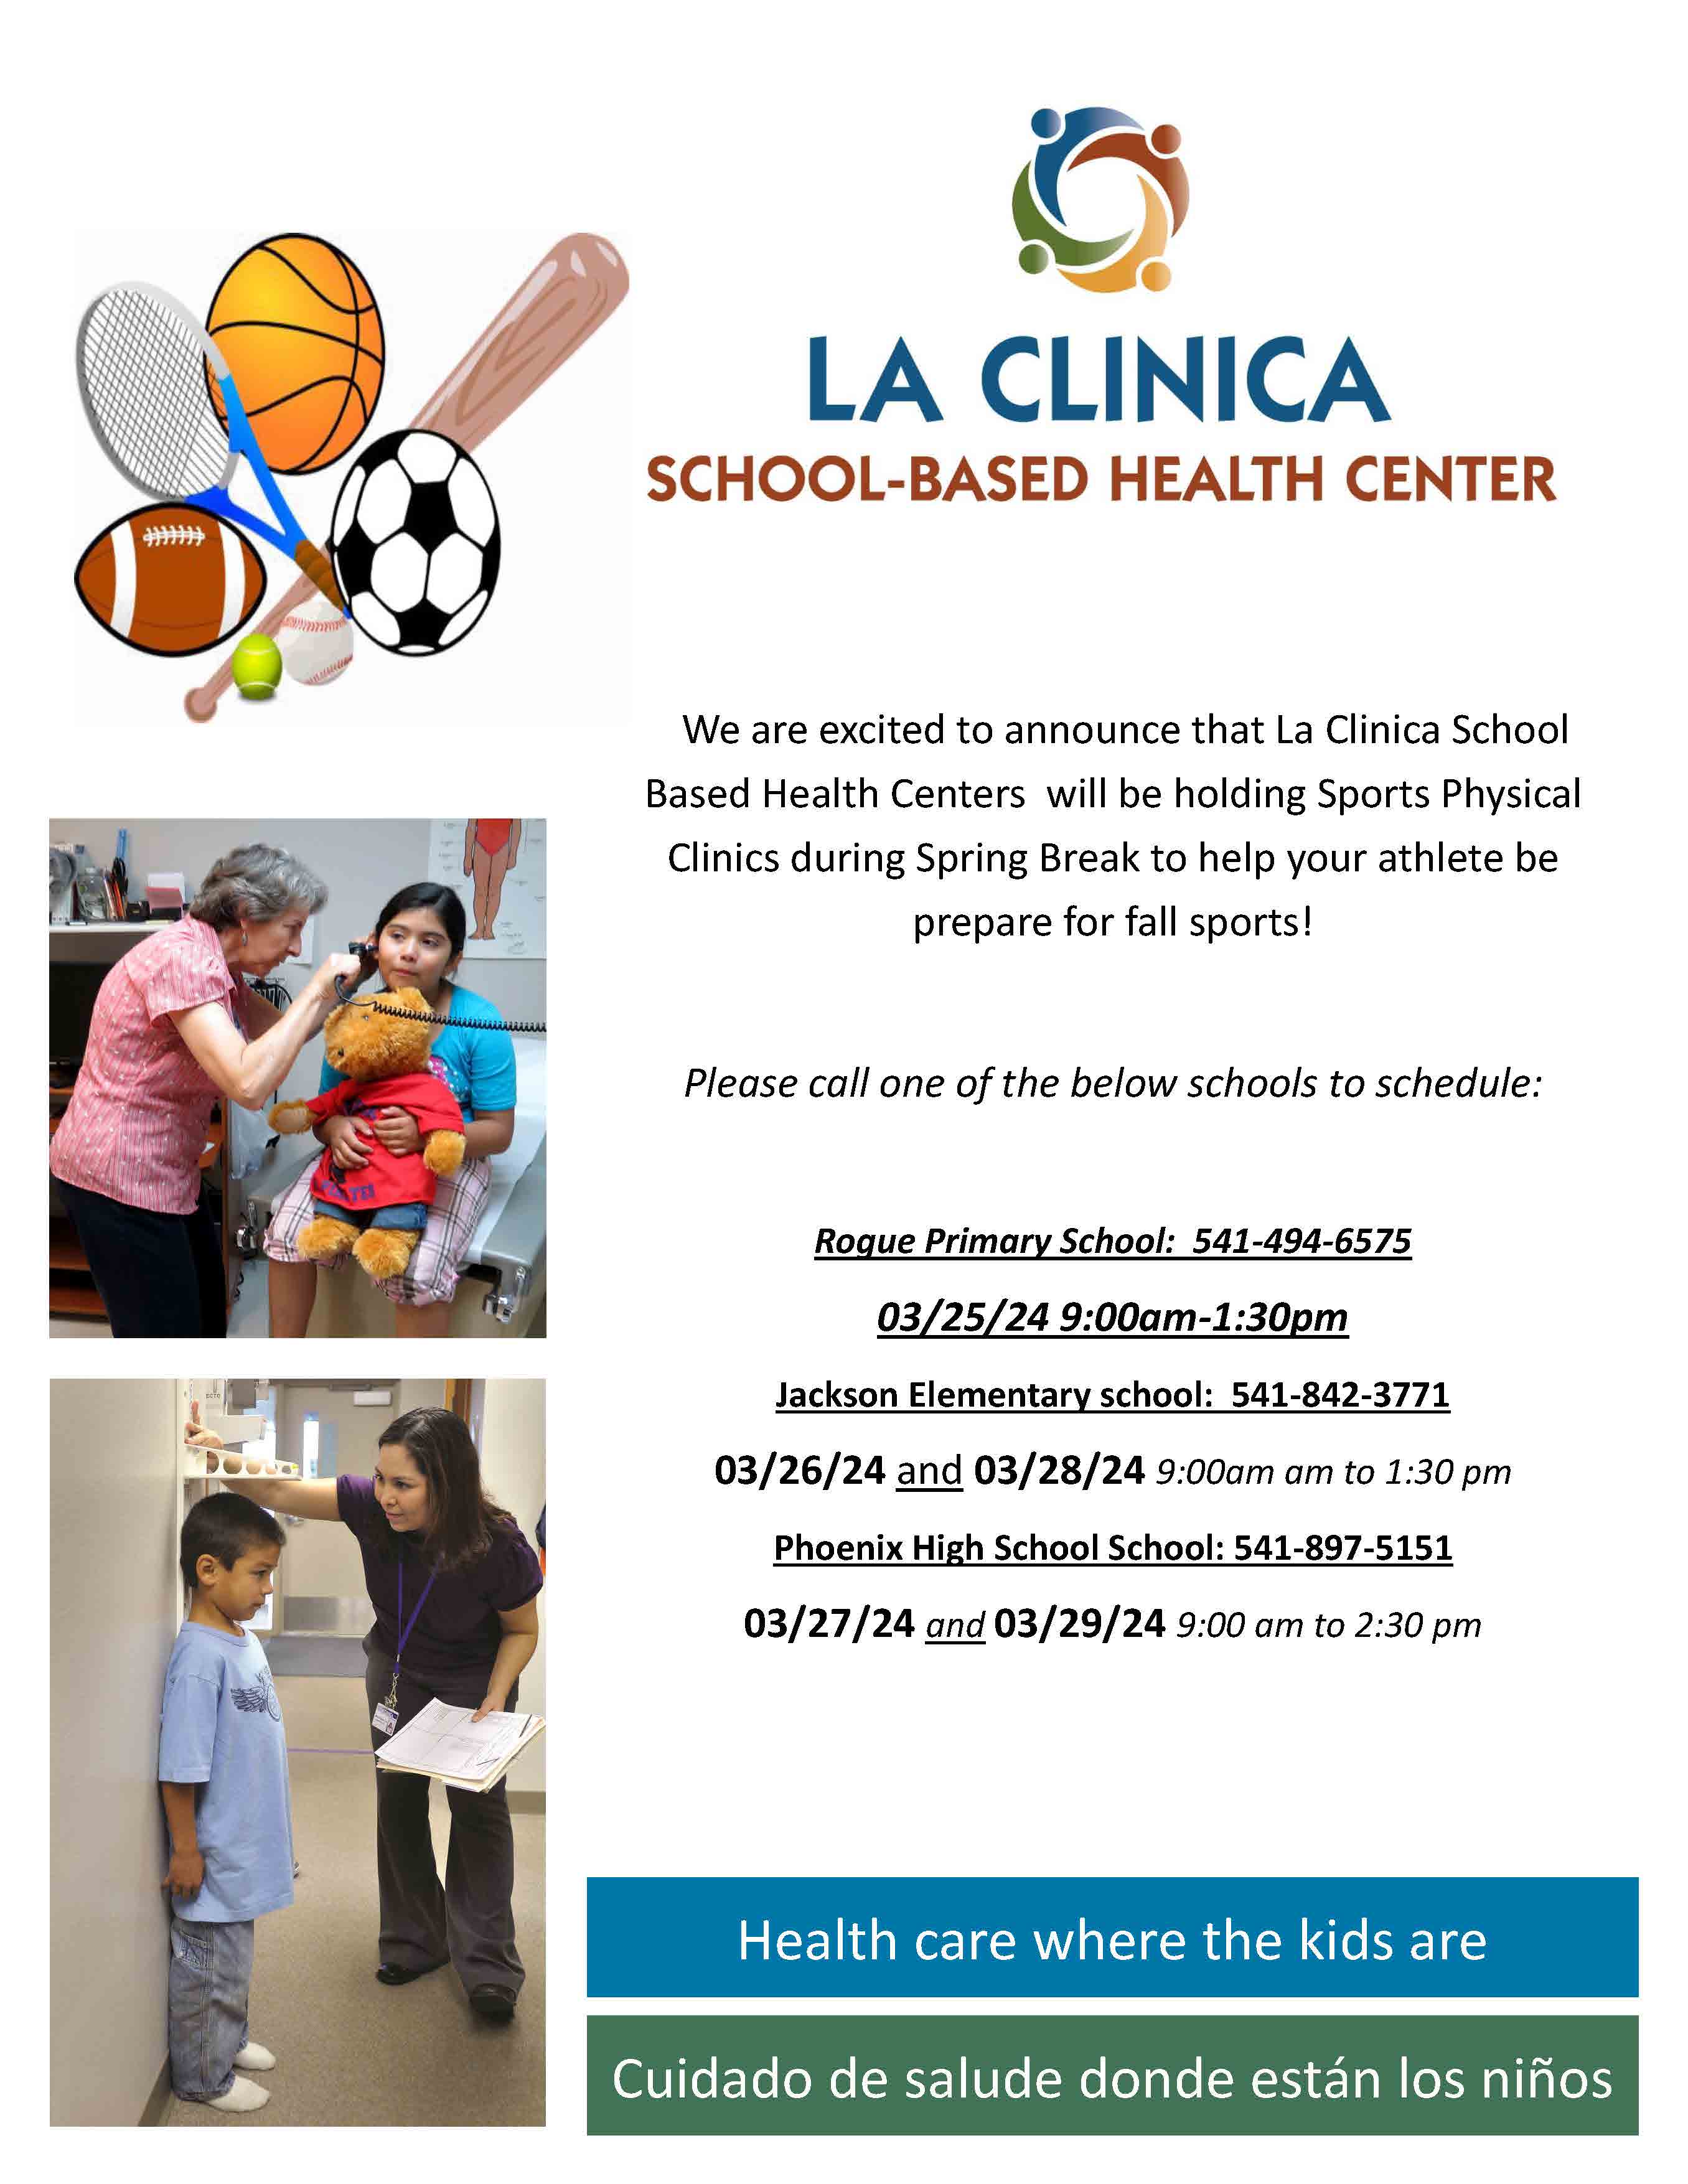 Health care where the kids are We are excited to announce that La Clinica School Based Health Centers will be holding Sports Physical Clinics during Spring Break to help your athlete be prepare for fall sports! Please call one of the below schools to schedule: Rogue Primary School: 541-494-6575 03/25/24 9:00am-1:30pm Jackson Elementary school: 541-842-3771 03/26/24 and 03/28/24 9:00am am to 1:30 pm Phoenix High School School: 541-897-5151 03/27/24 and 03/29/24 9:00 am to 2:30 pm Cuidado de salude donde están los niños